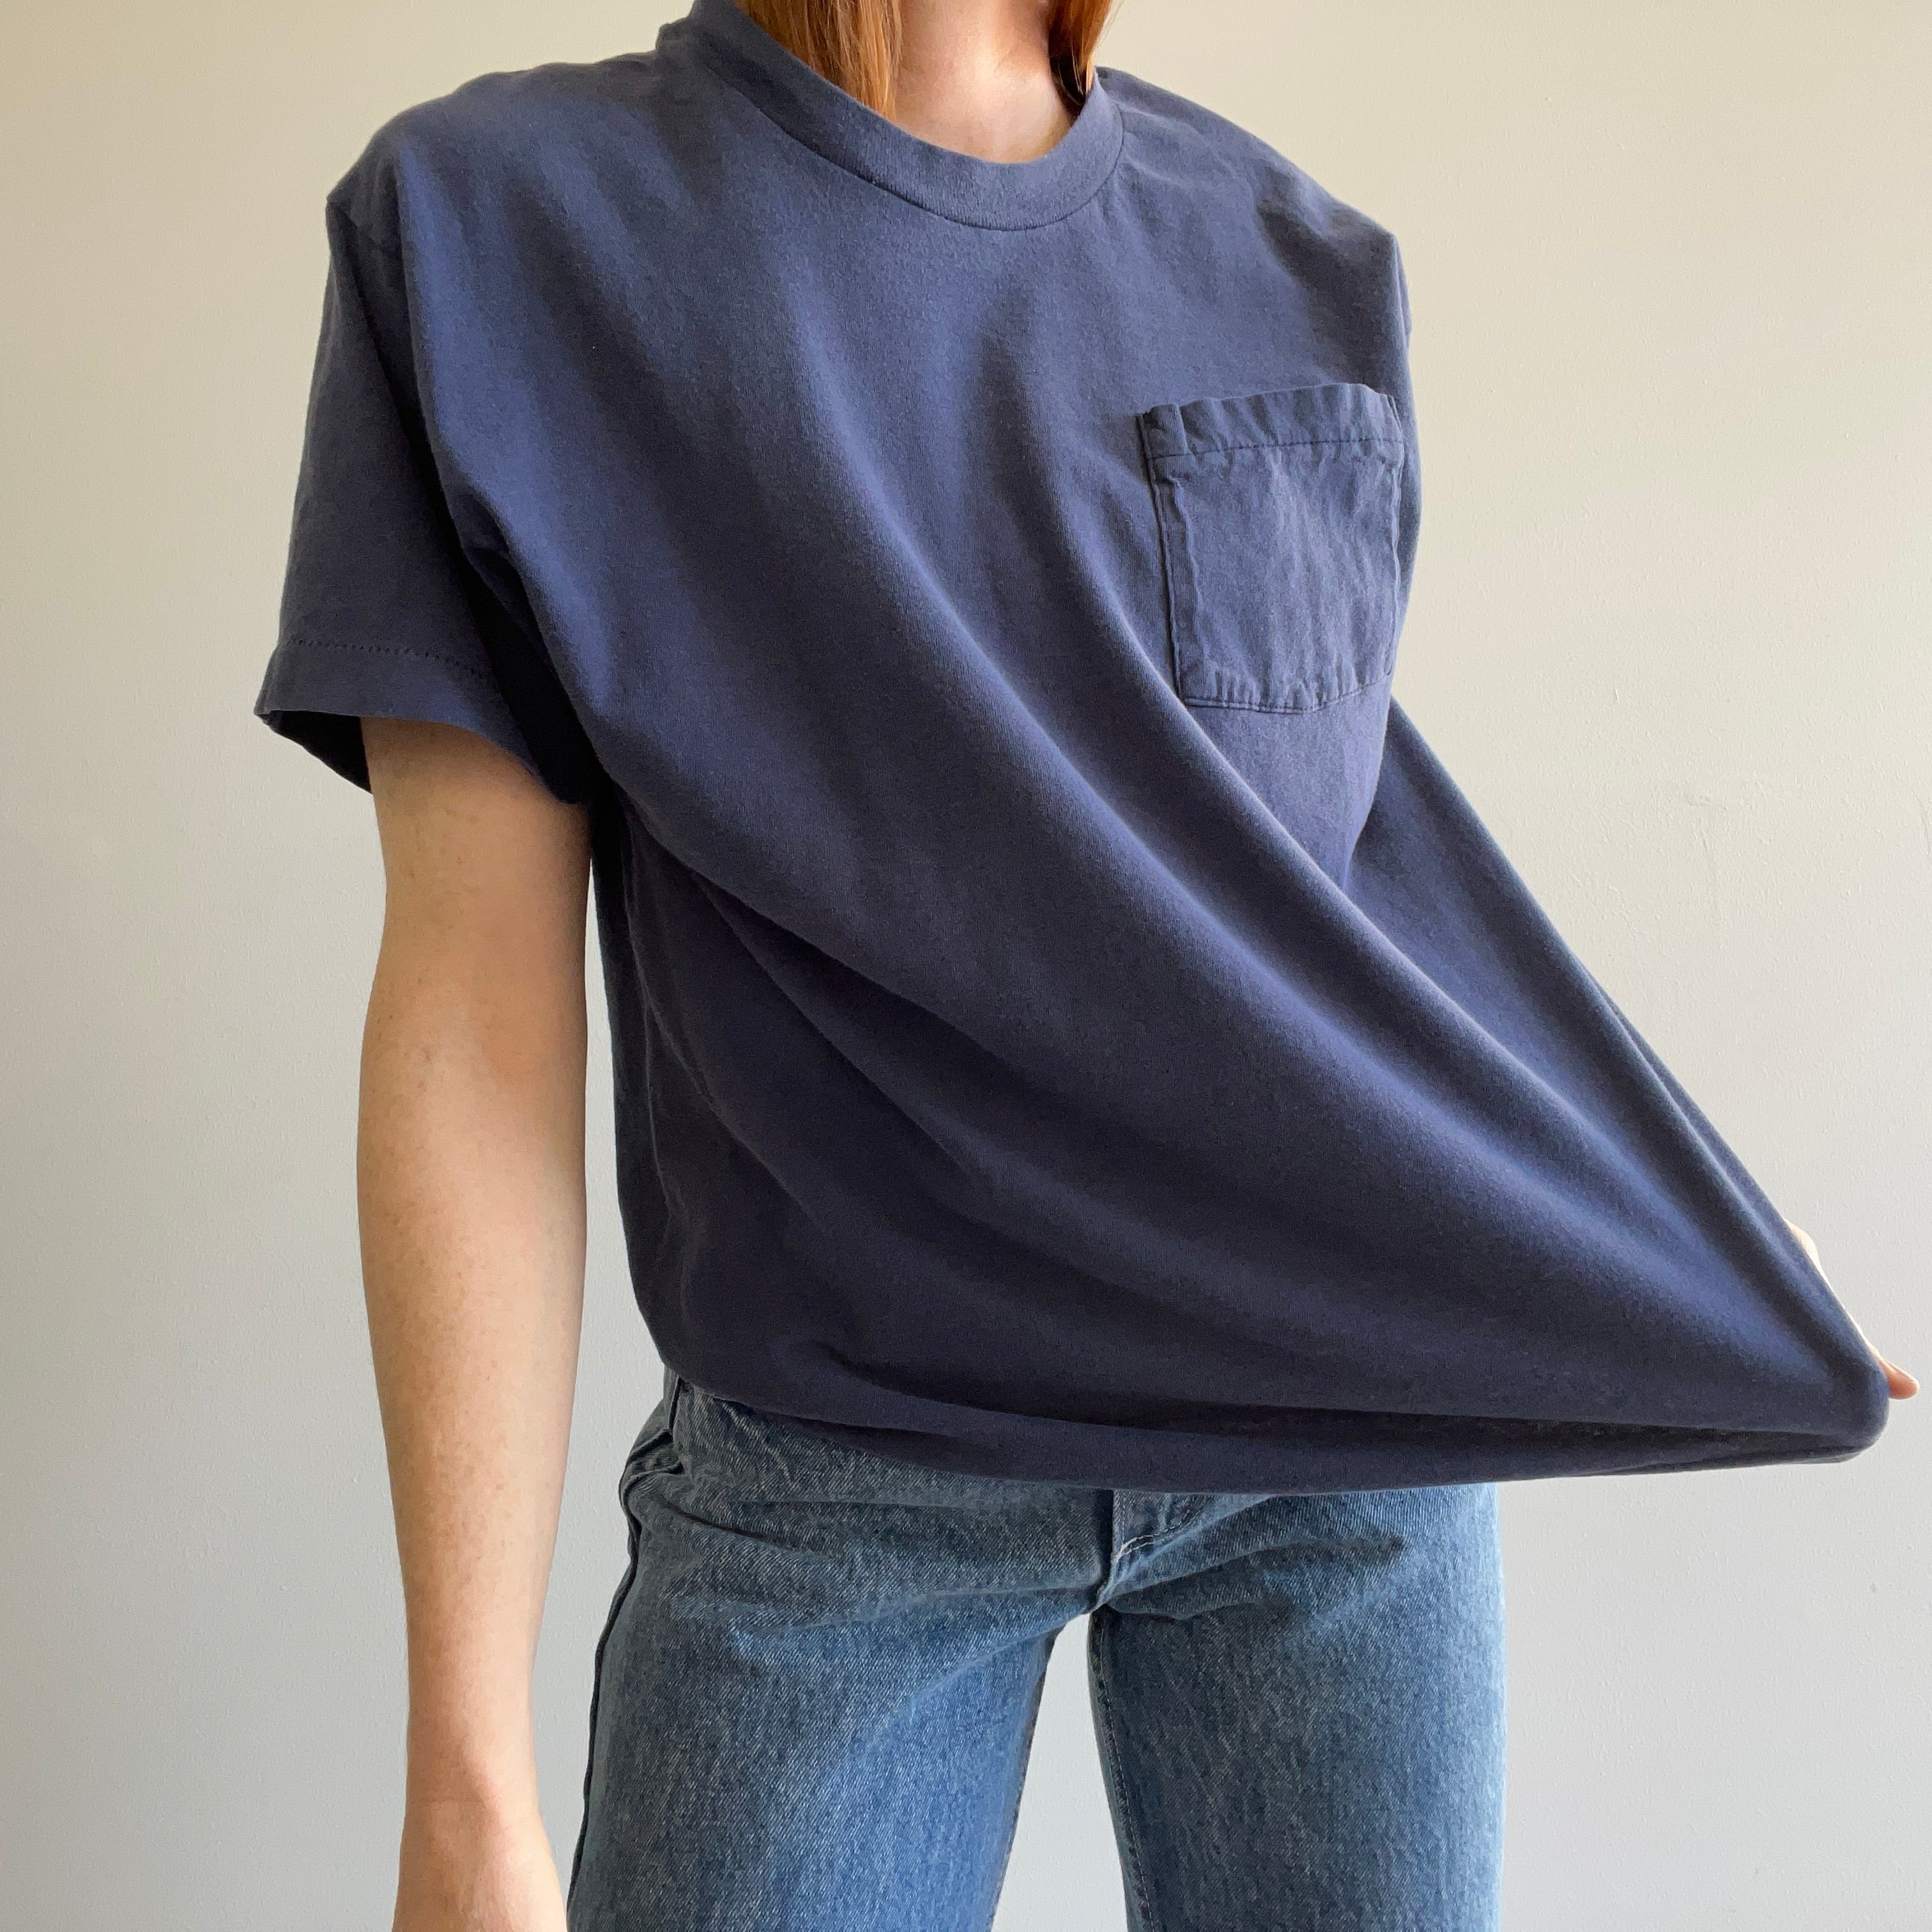 1980s Faded and Worn Blank Navy Pocket T-Shirt by FOTL